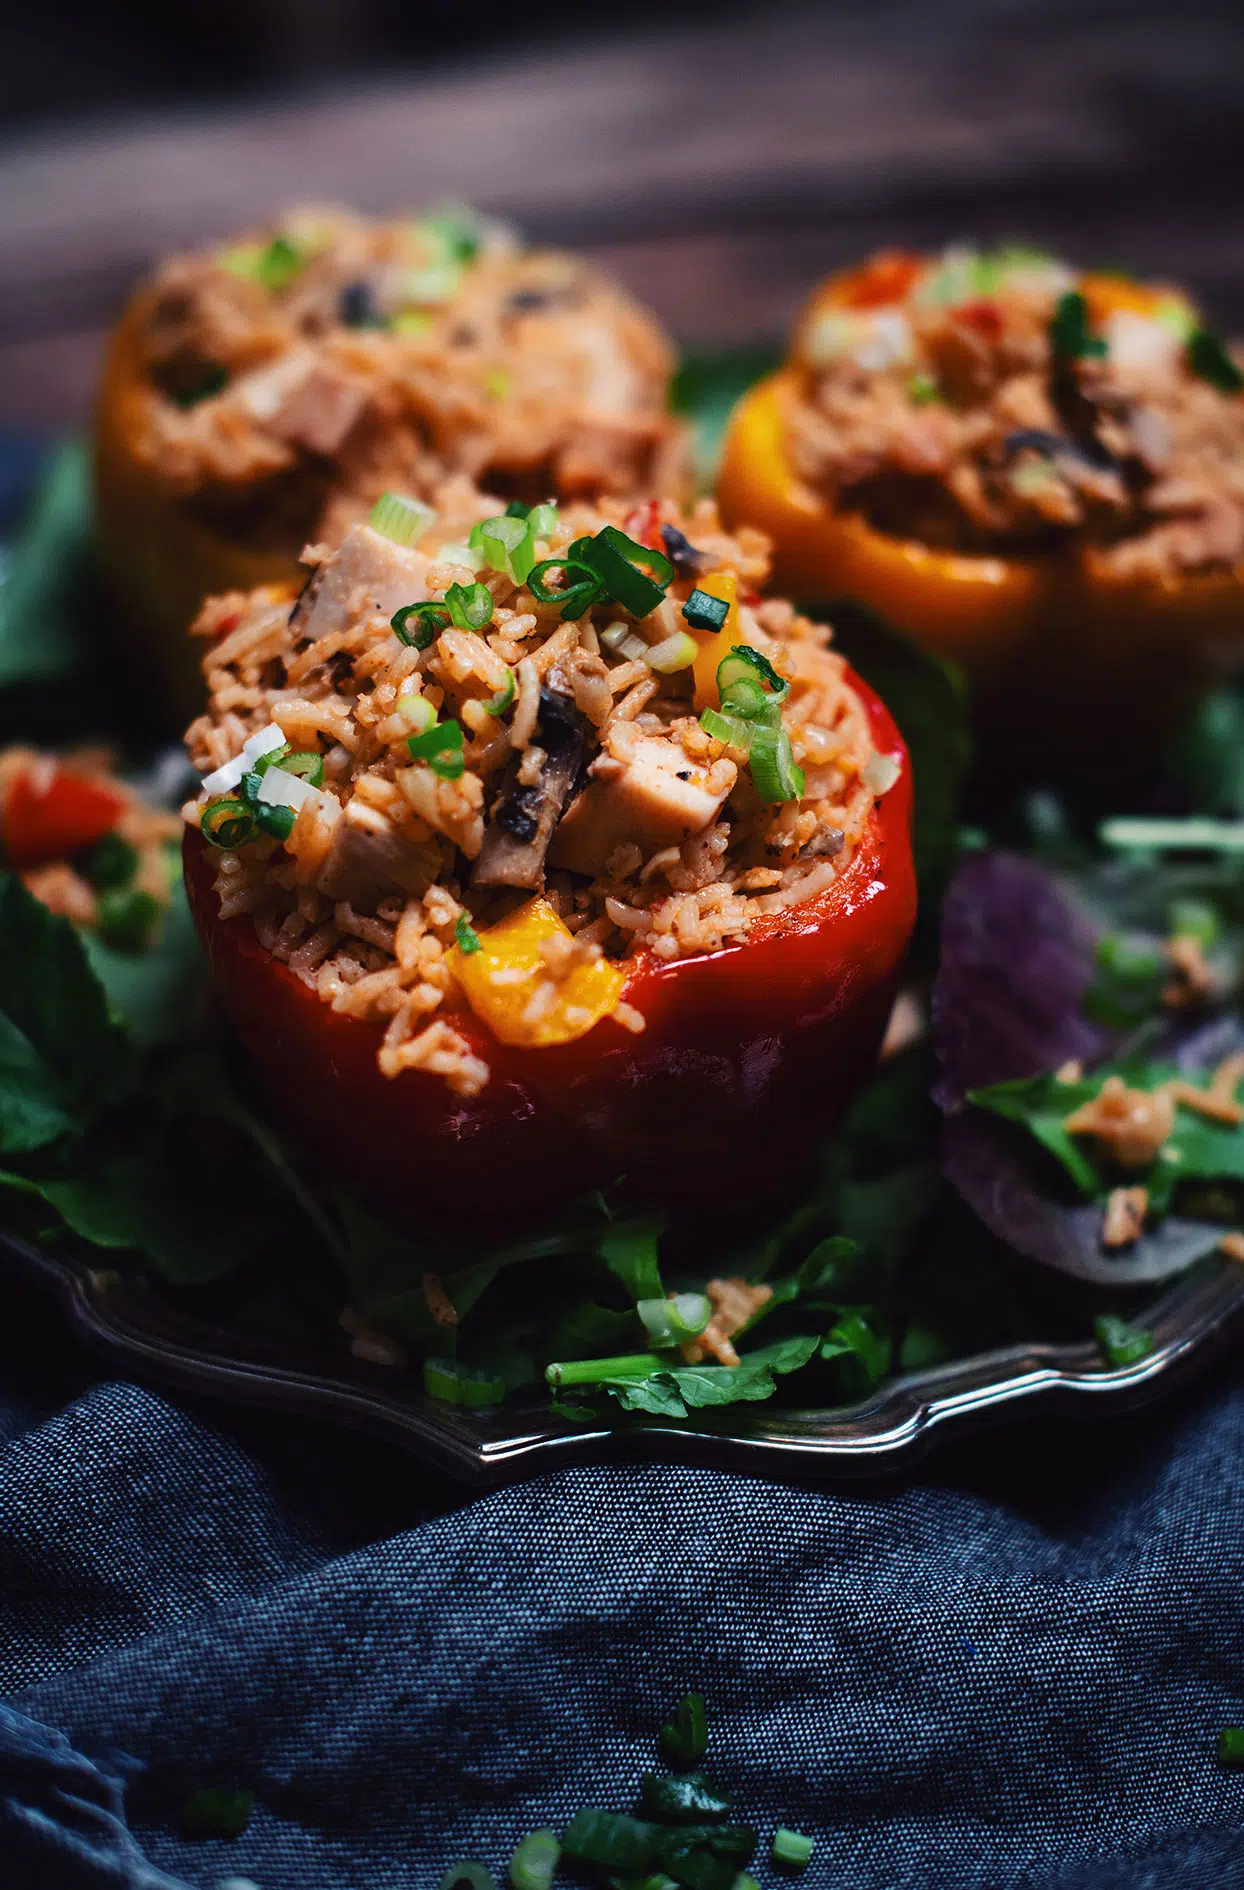 Stuffed bell peppers with vegetable rice and grilled BBQ chicken